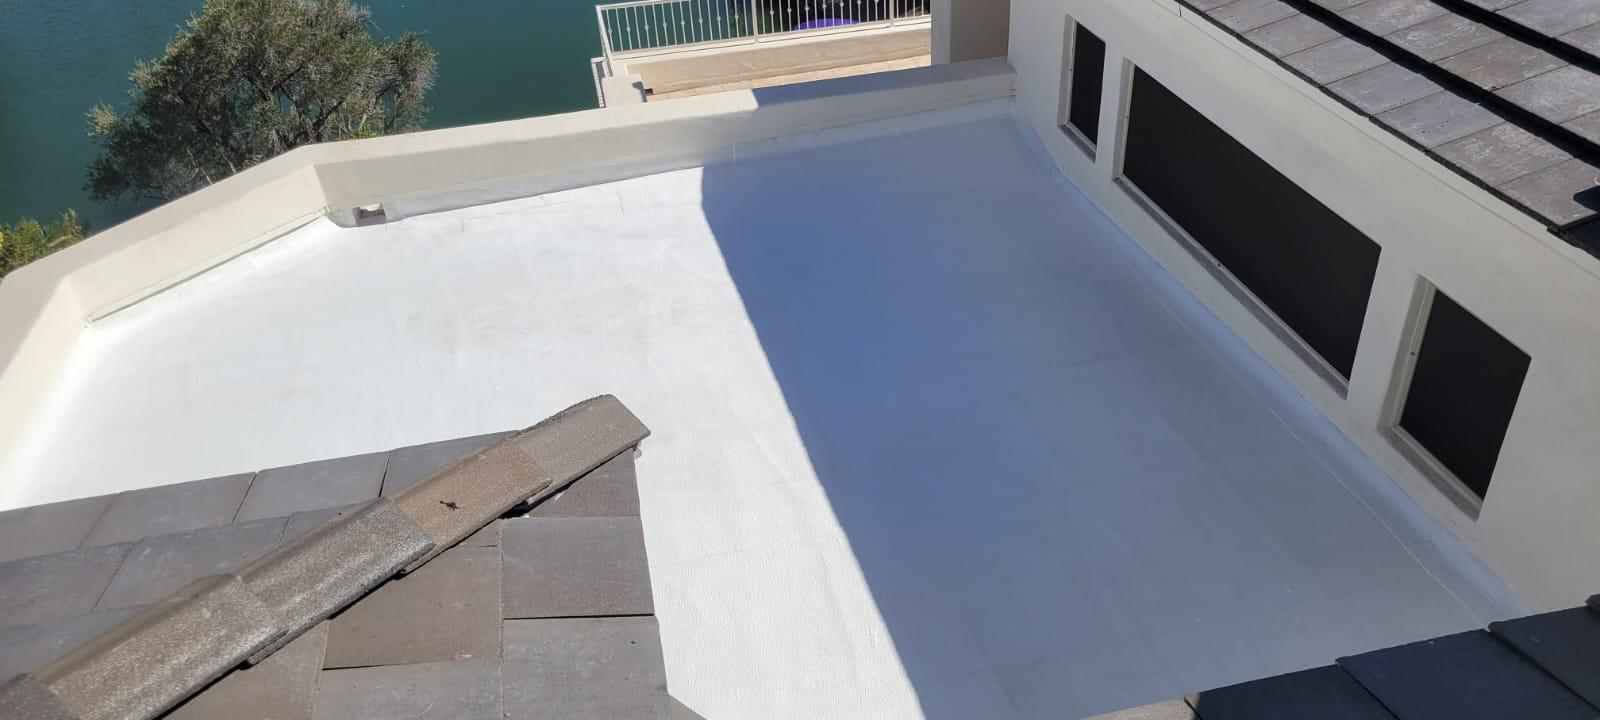 Sunny panorama over a Gilbert residential area with a newly installed spray foam roof, displaying the sleek, reflective surface for optimal insulation.